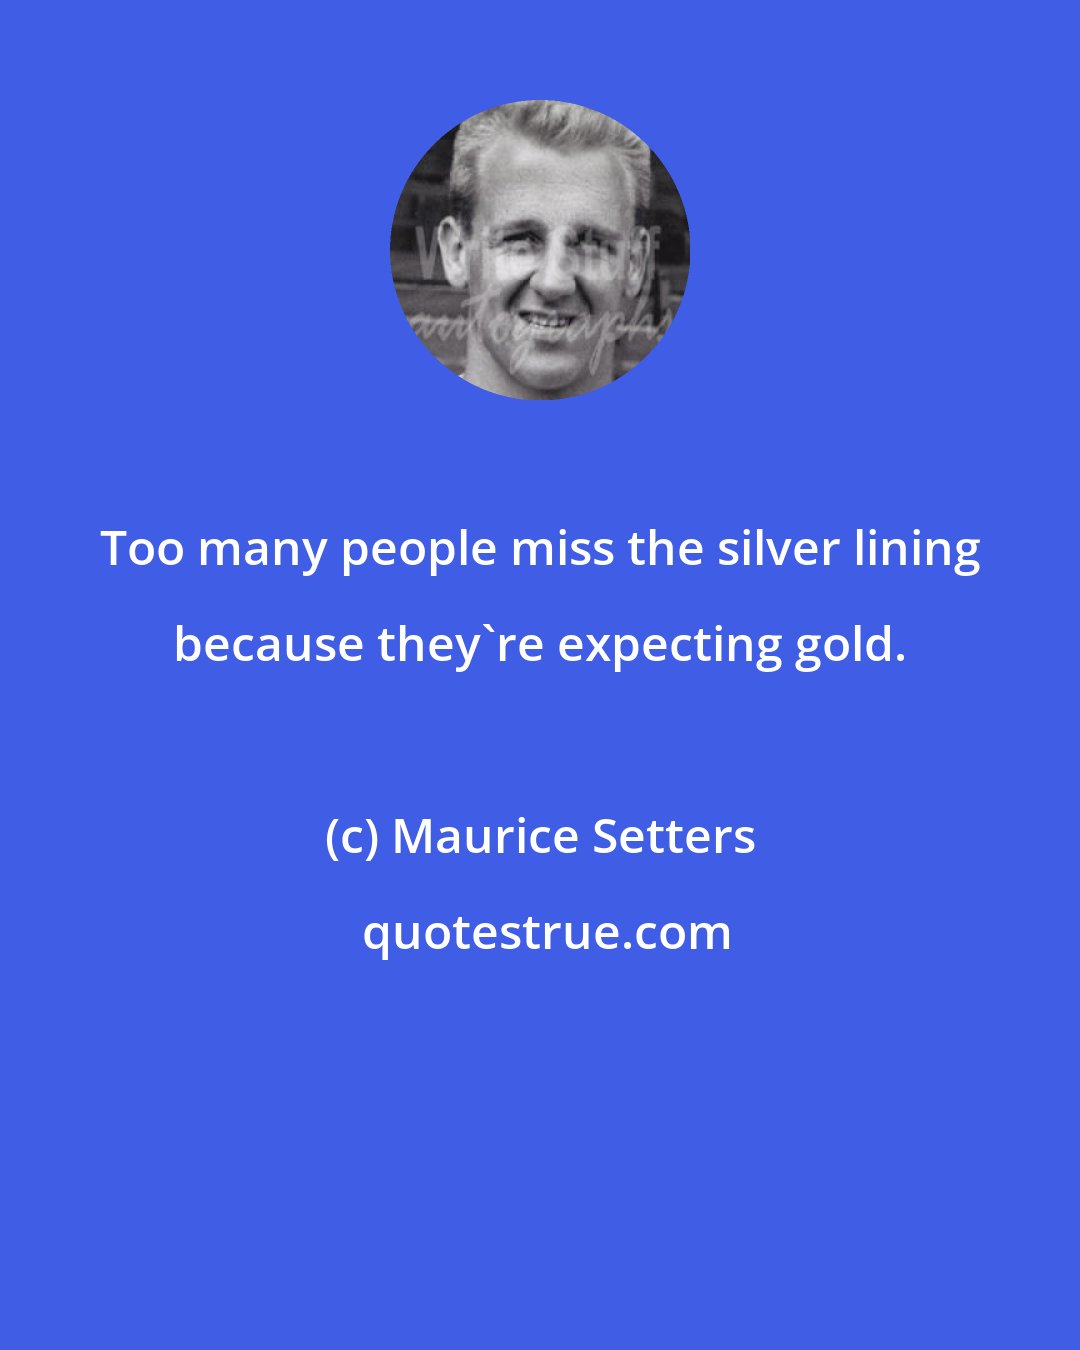 Maurice Setters: Too many people miss the silver lining because they're expecting gold.